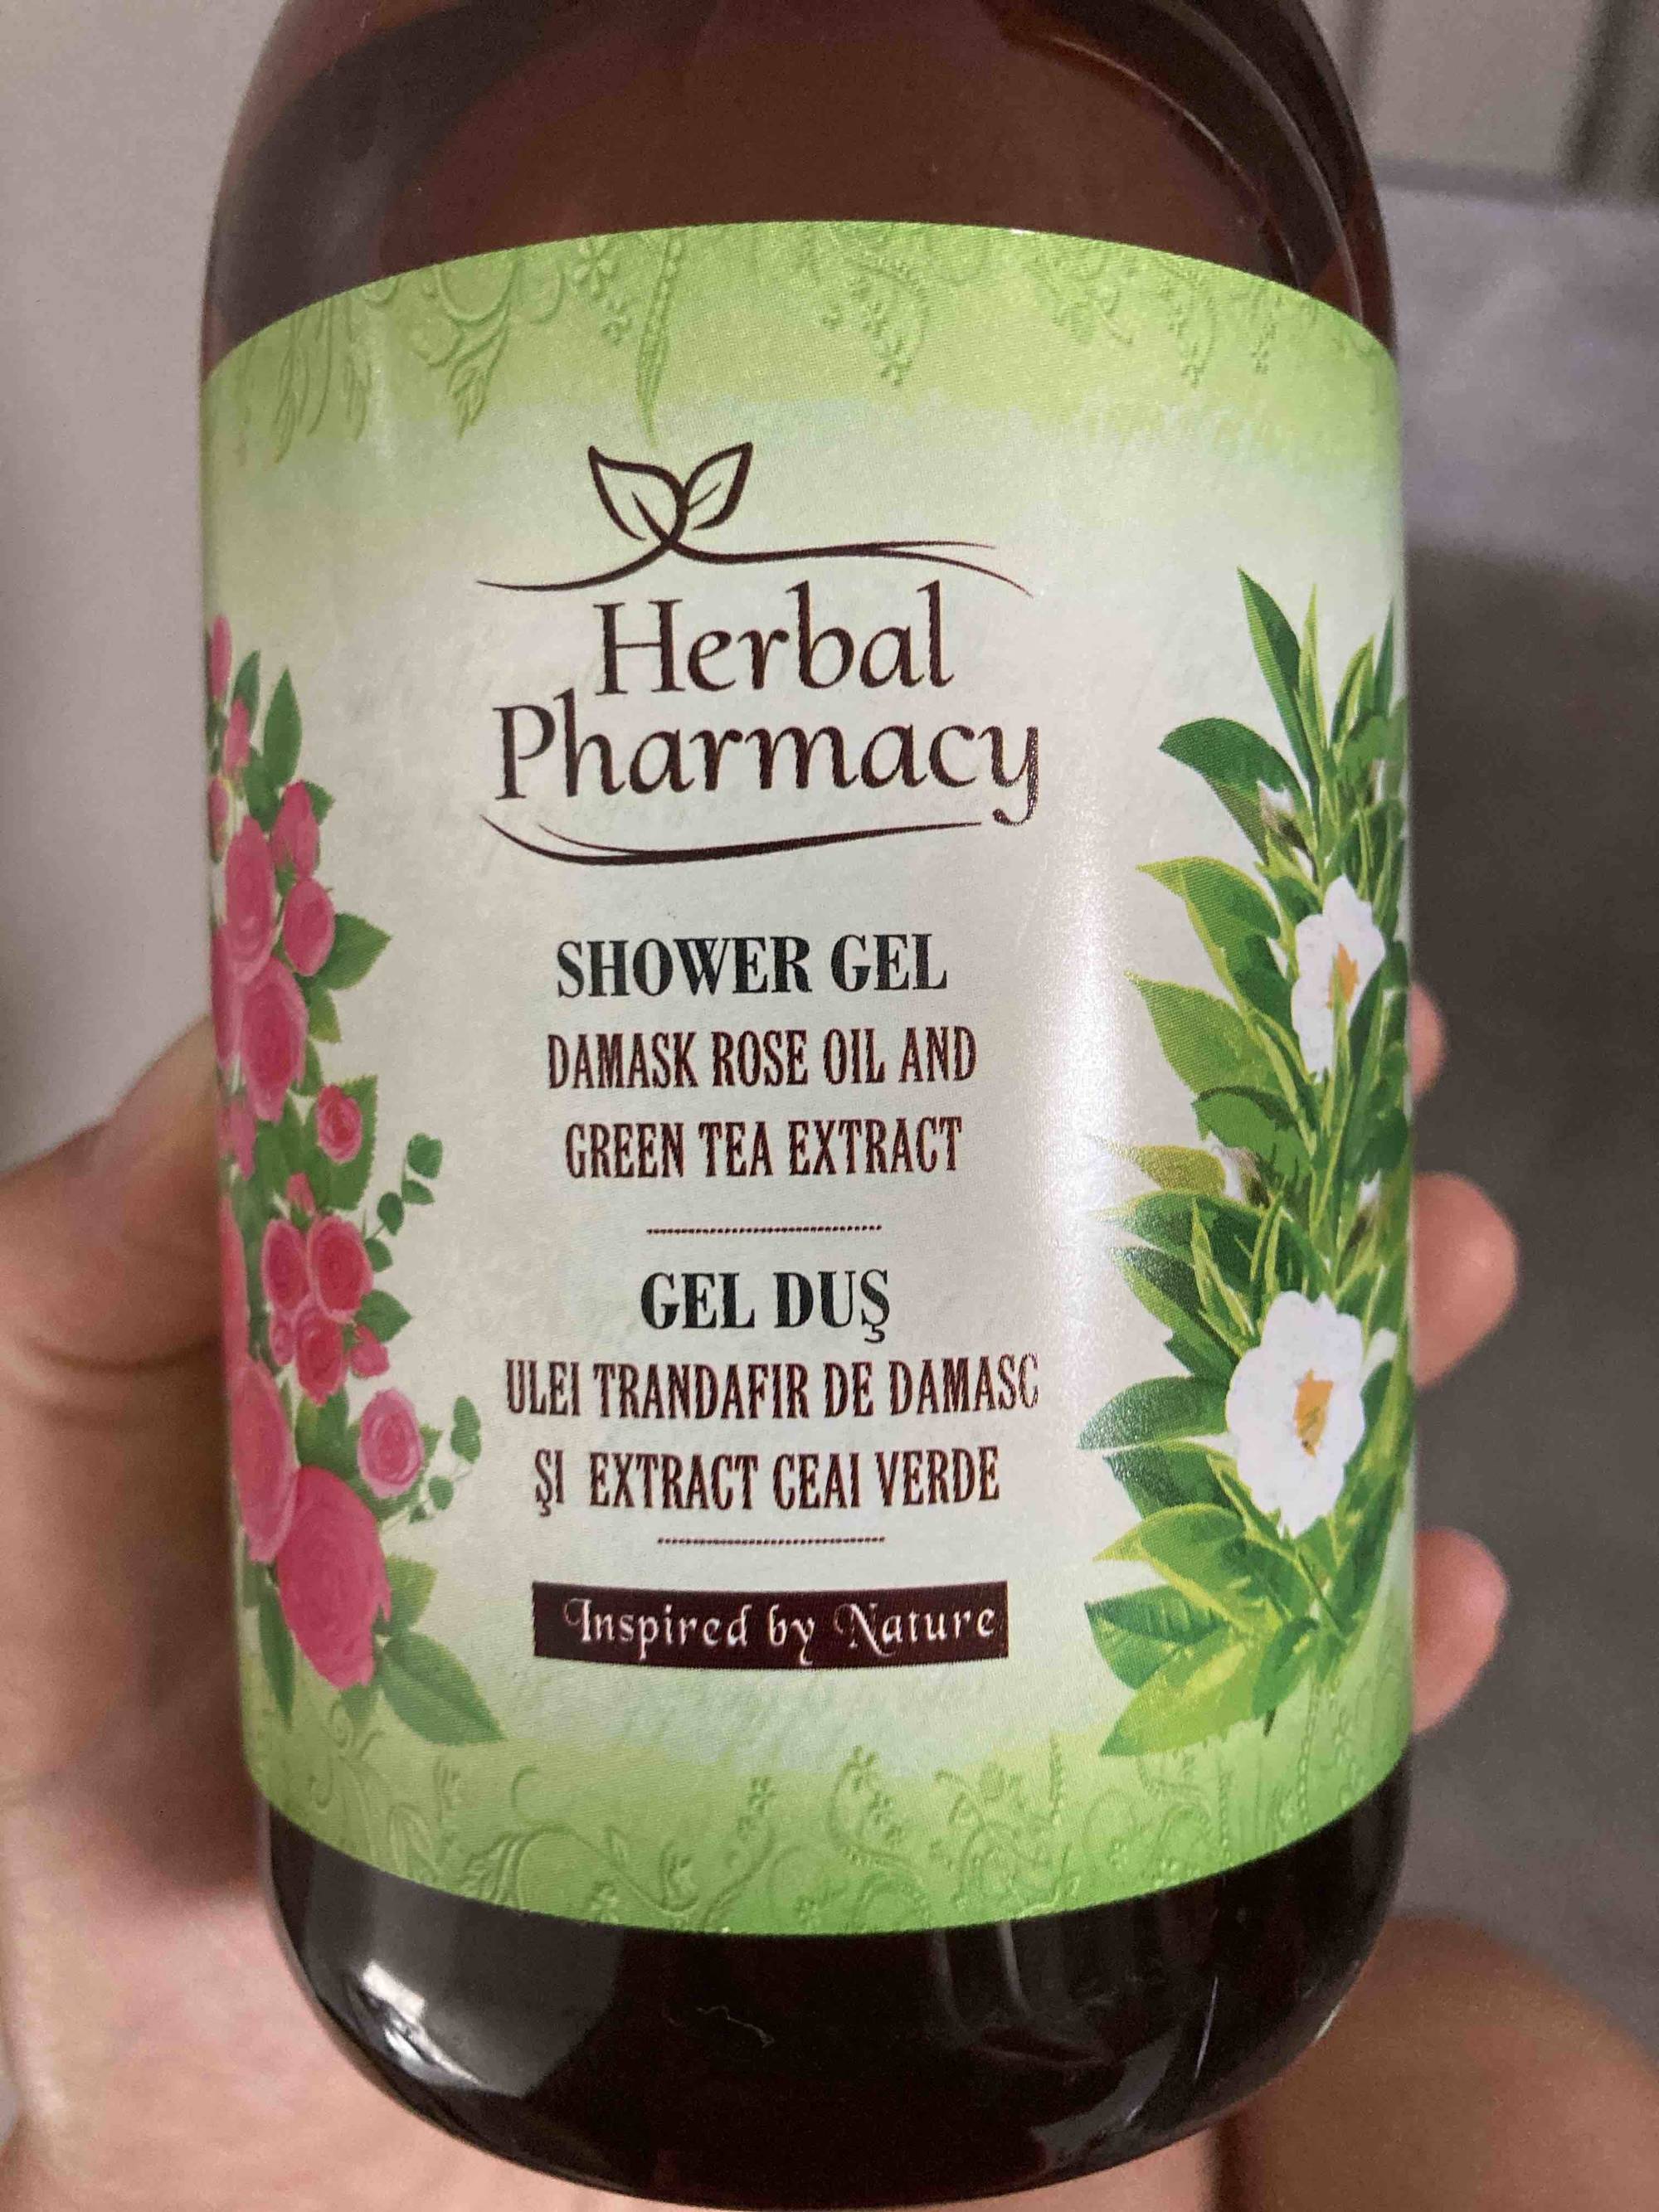 HERBAL PHARMACY - Shower gel damask rose oil and green tea extract